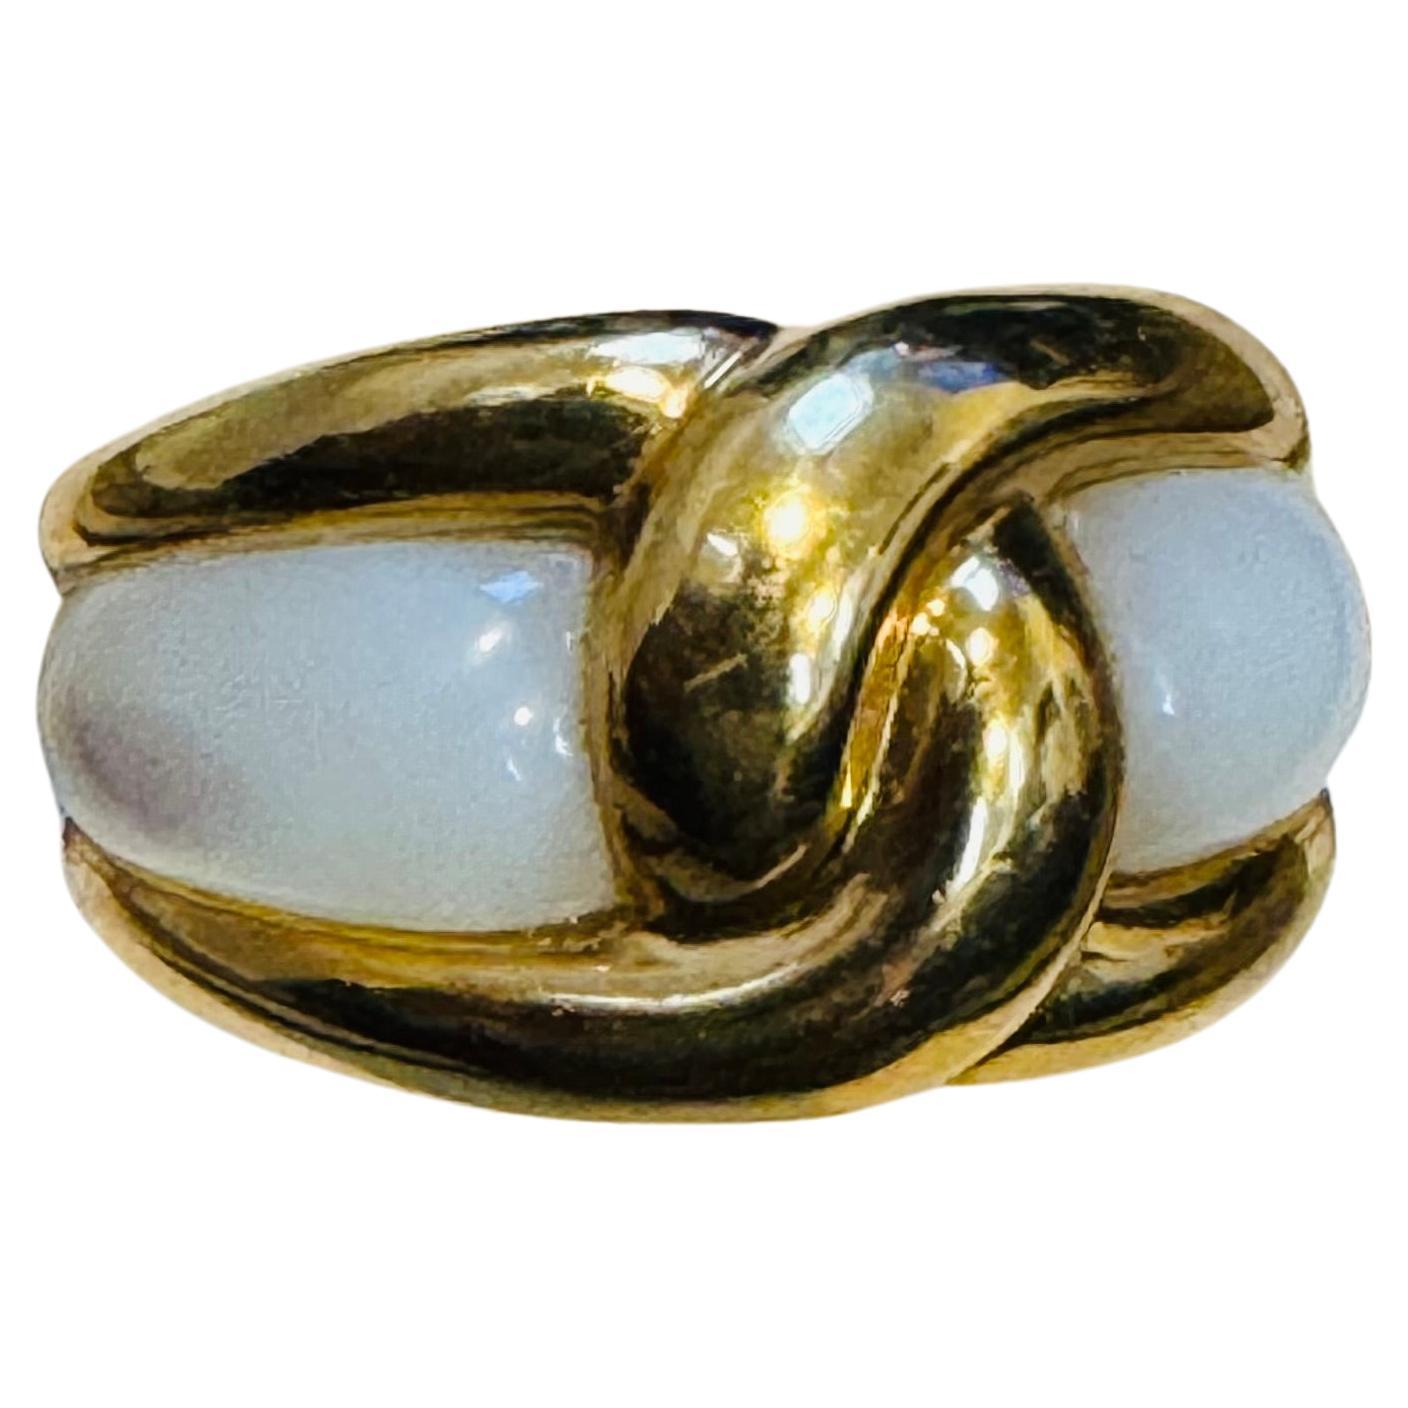 Van Cleef & Arpels Contemporary Mother of pearl “Twisted” Ring 18KY Gold Size5.5 For Sale